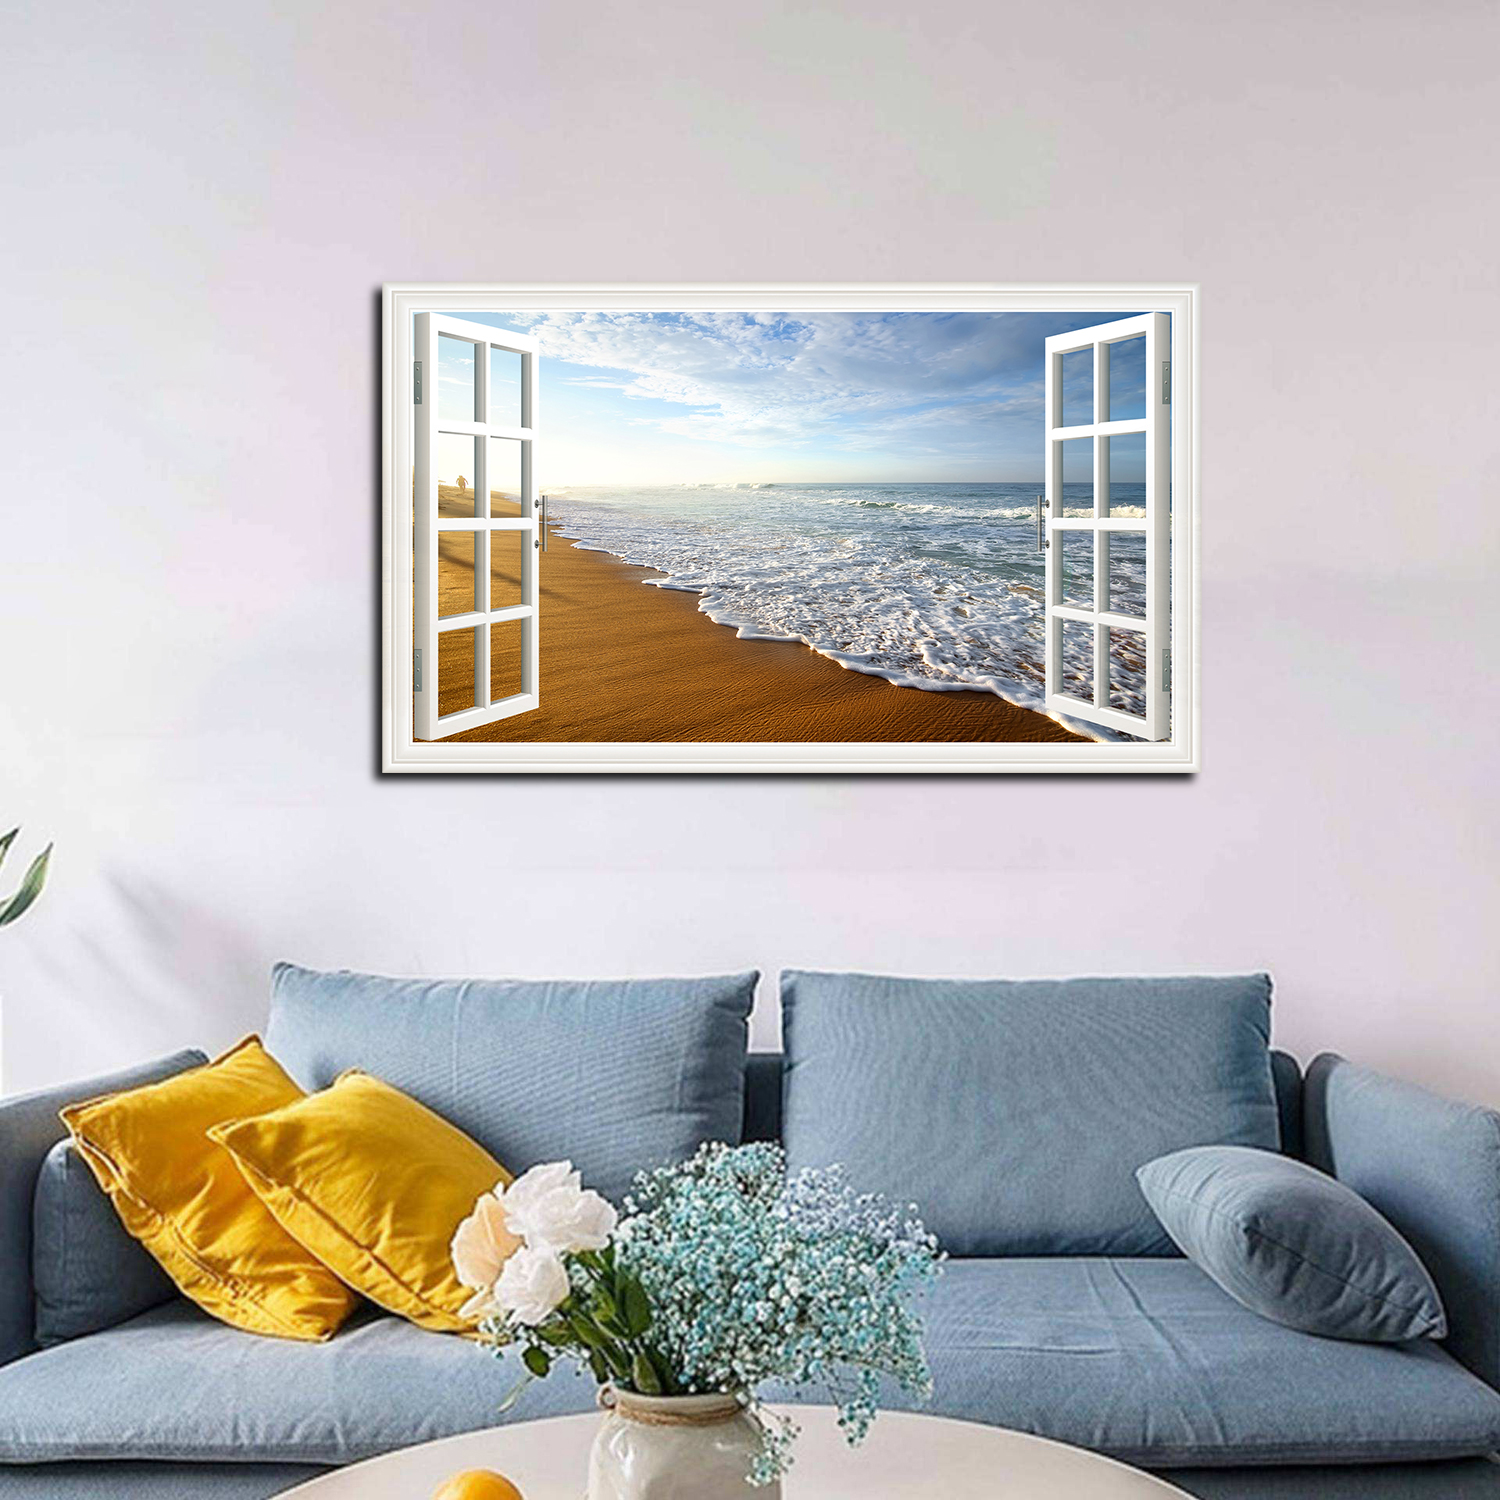 Window View of Beach Ultra Canvs Art Fake Open Window Wall Art Beach Ultra Framed  Painting For Livingroom Office Bedroom Ready to Hang